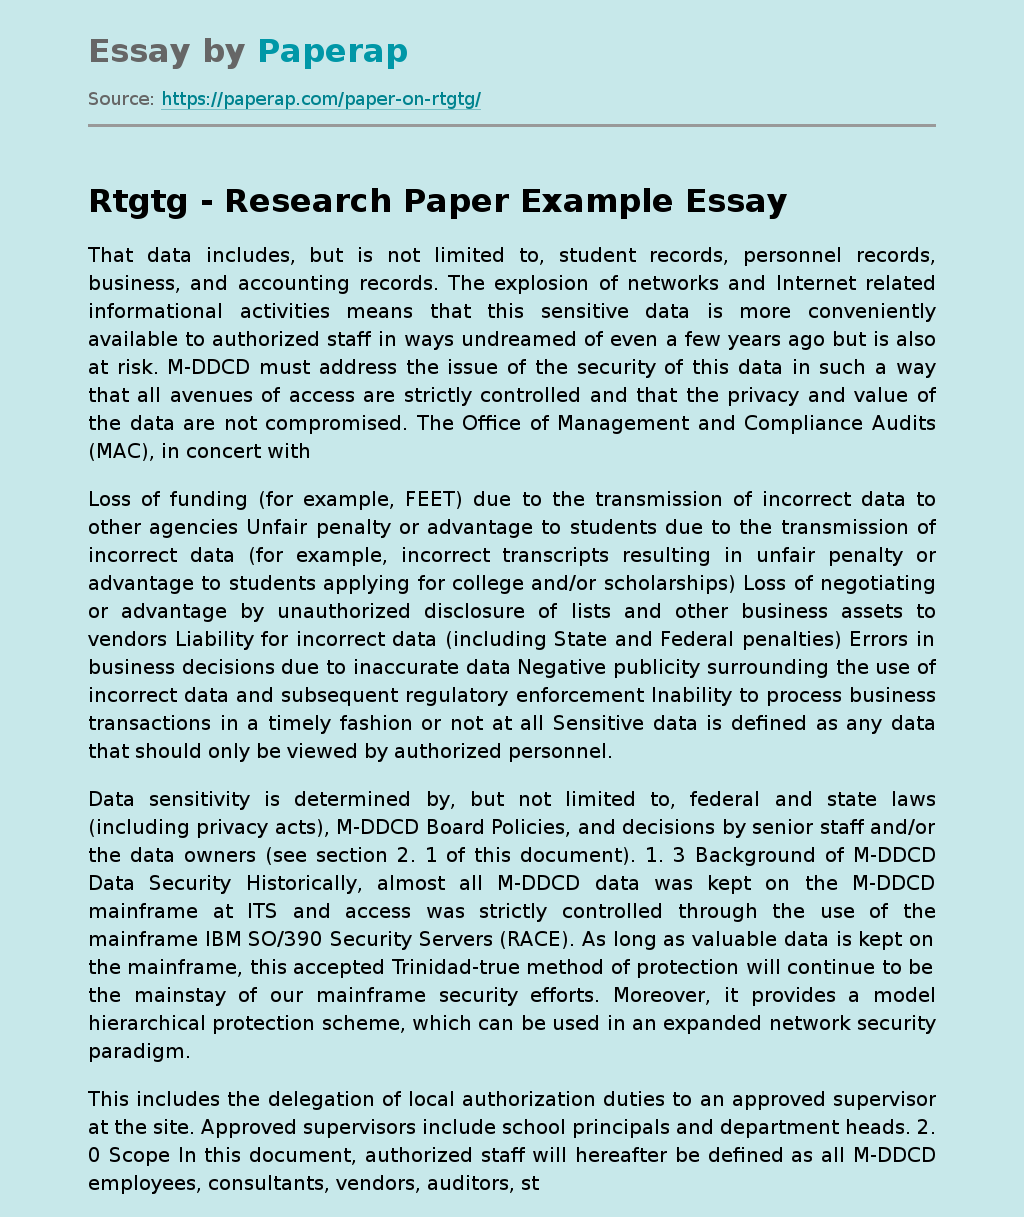 Rtgtg - Research Paper Example